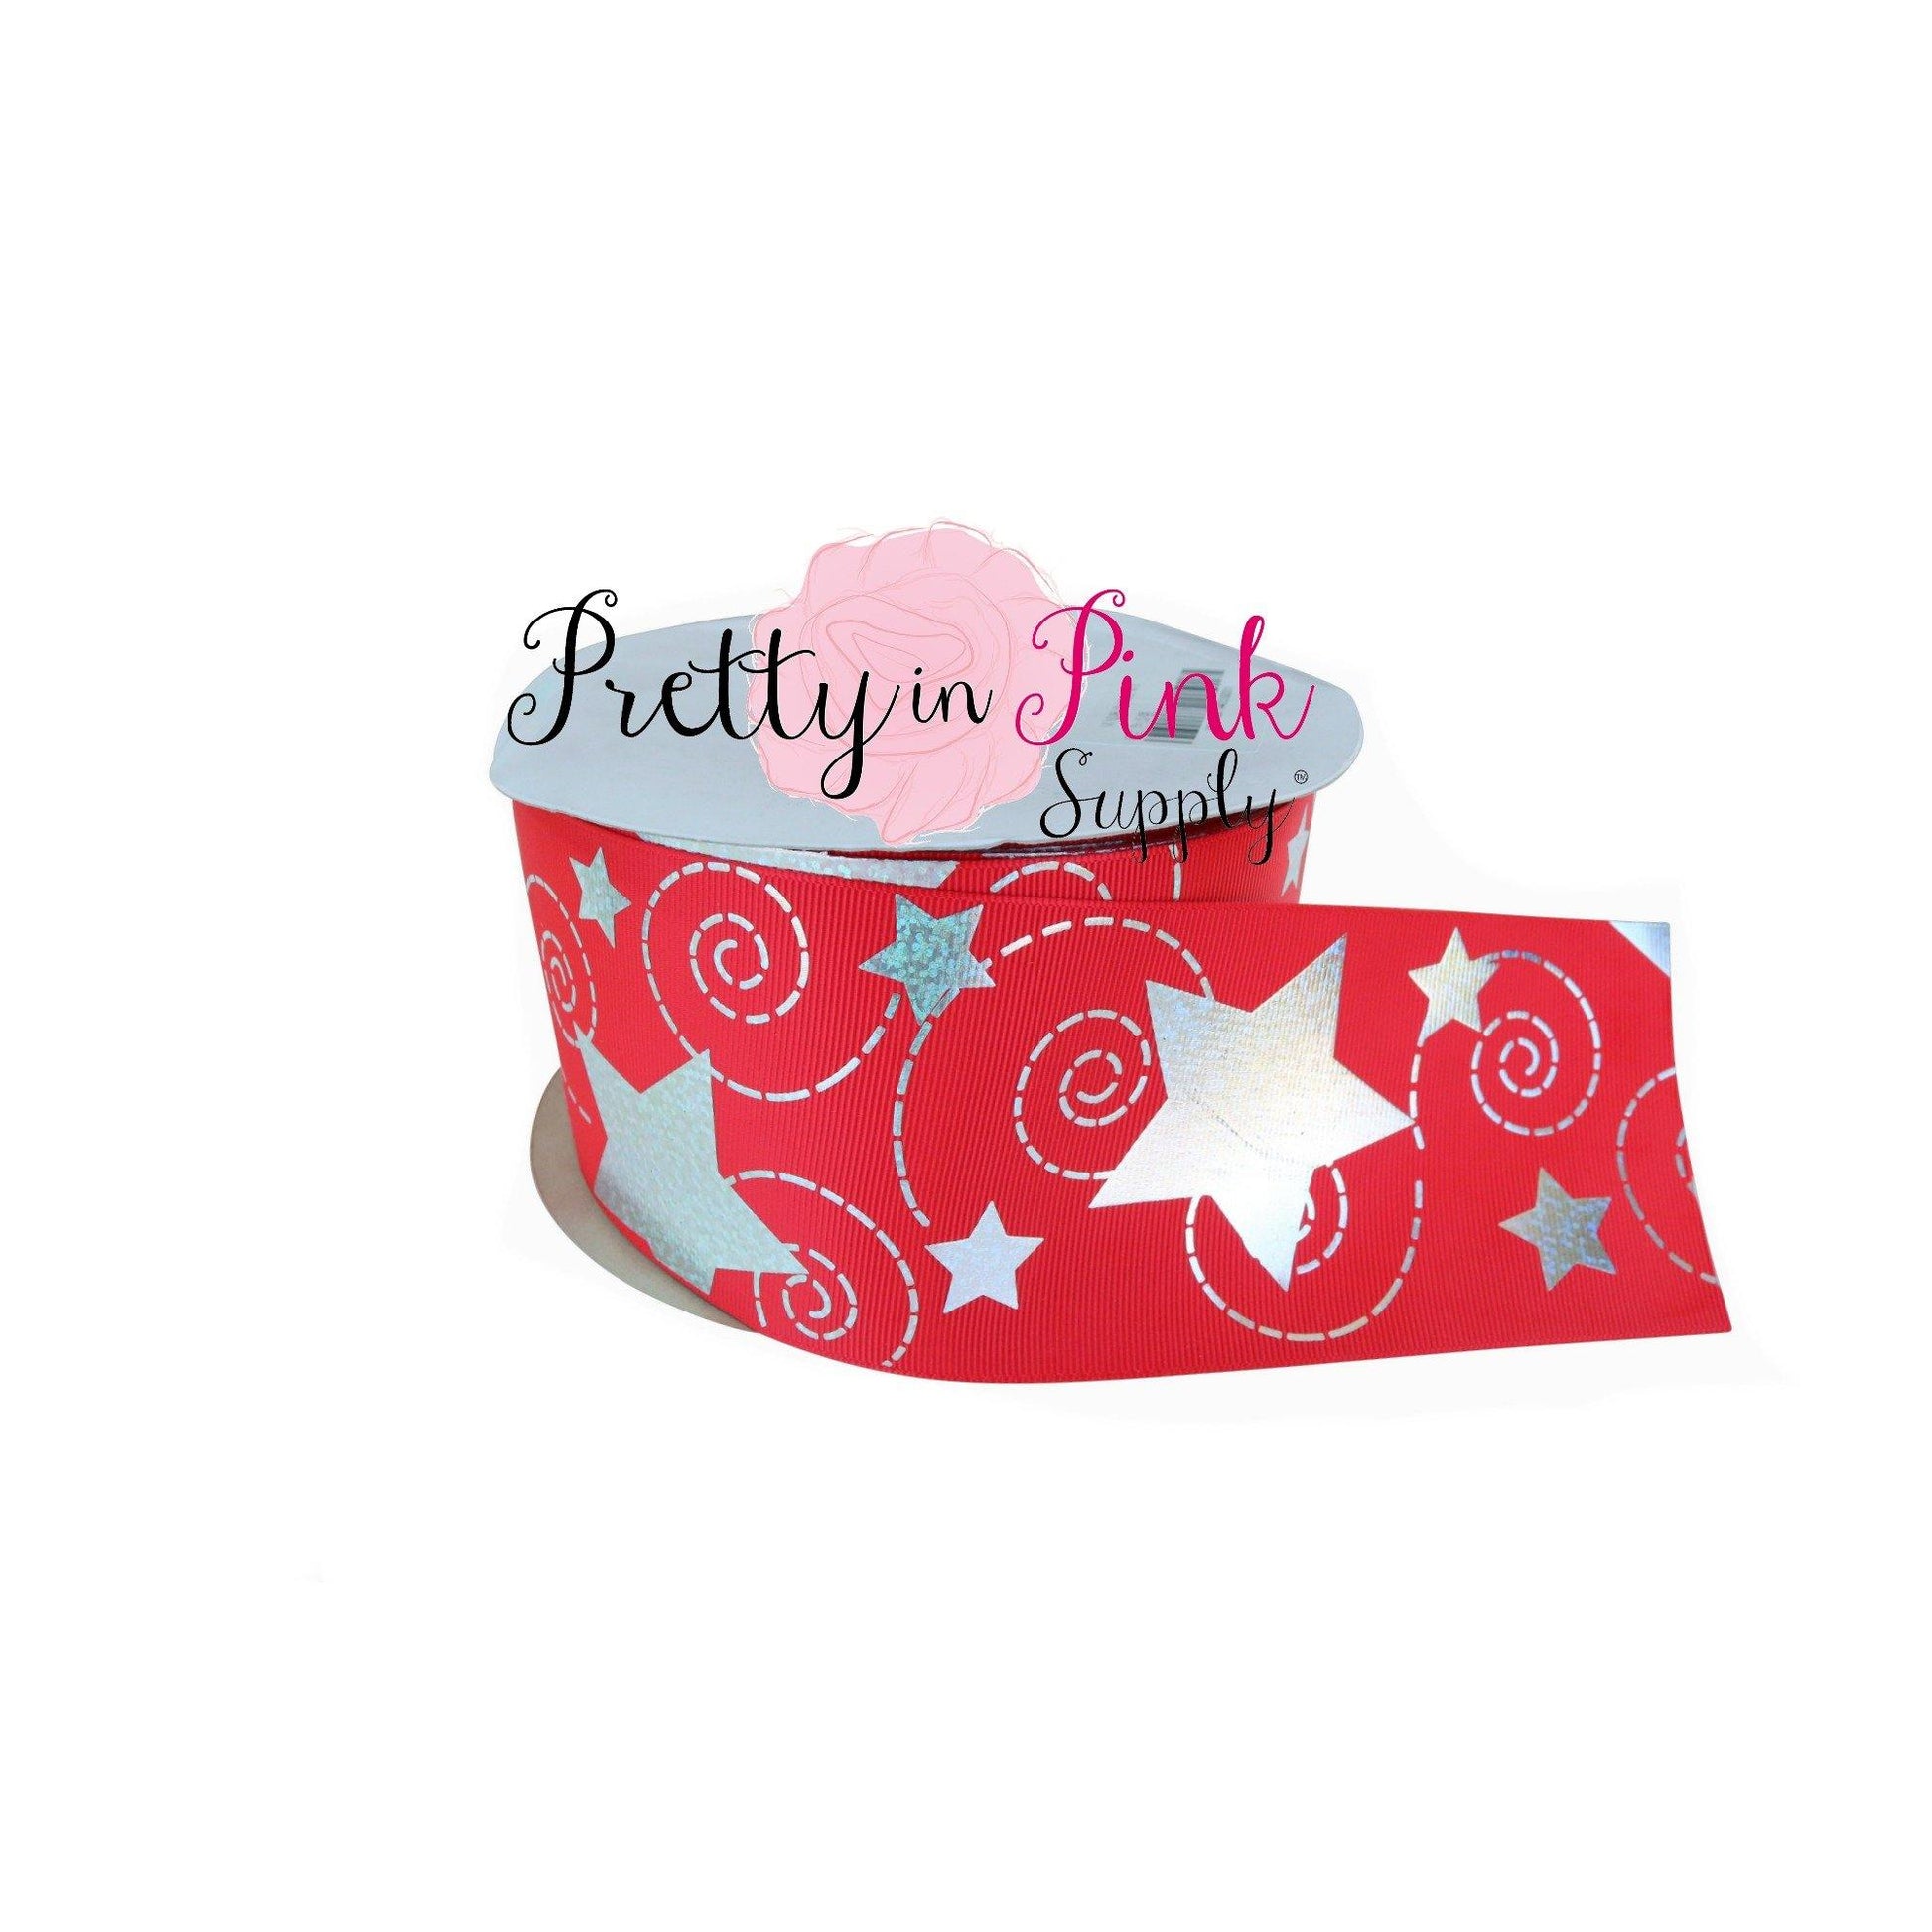 3" Red Silver Holographic Star Grosgrain RIBBON - Pretty in Pink Supply